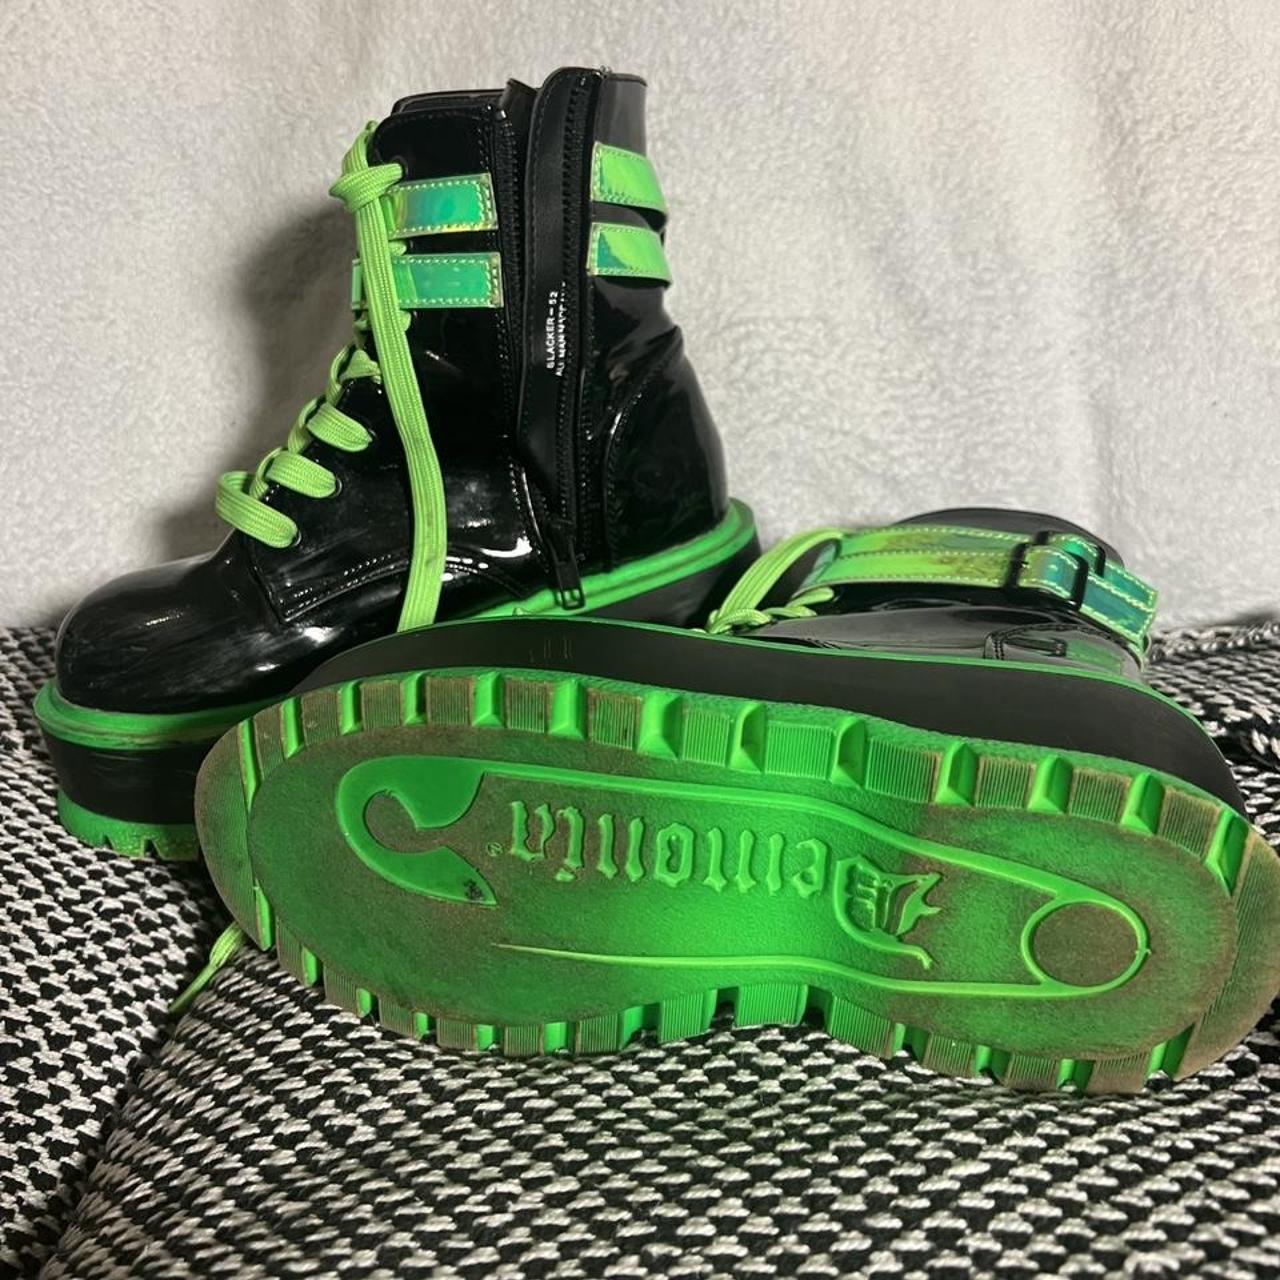 Product Image 2 - Neon green and black demonia